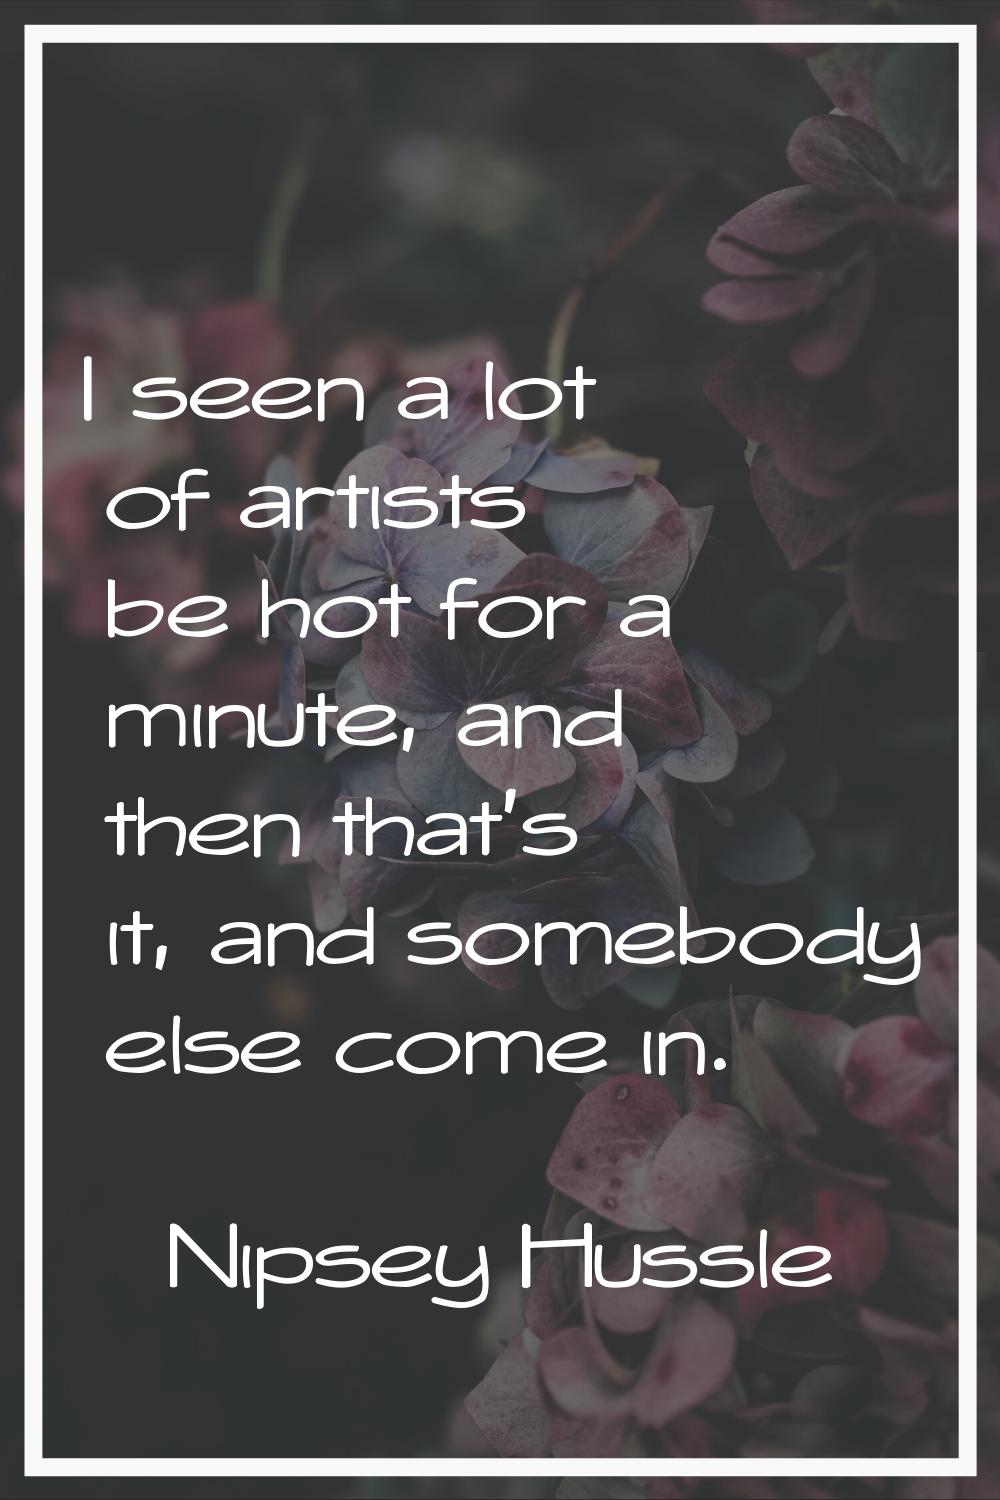 I seen a lot of artists be hot for a minute, and then that's it, and somebody else come in.